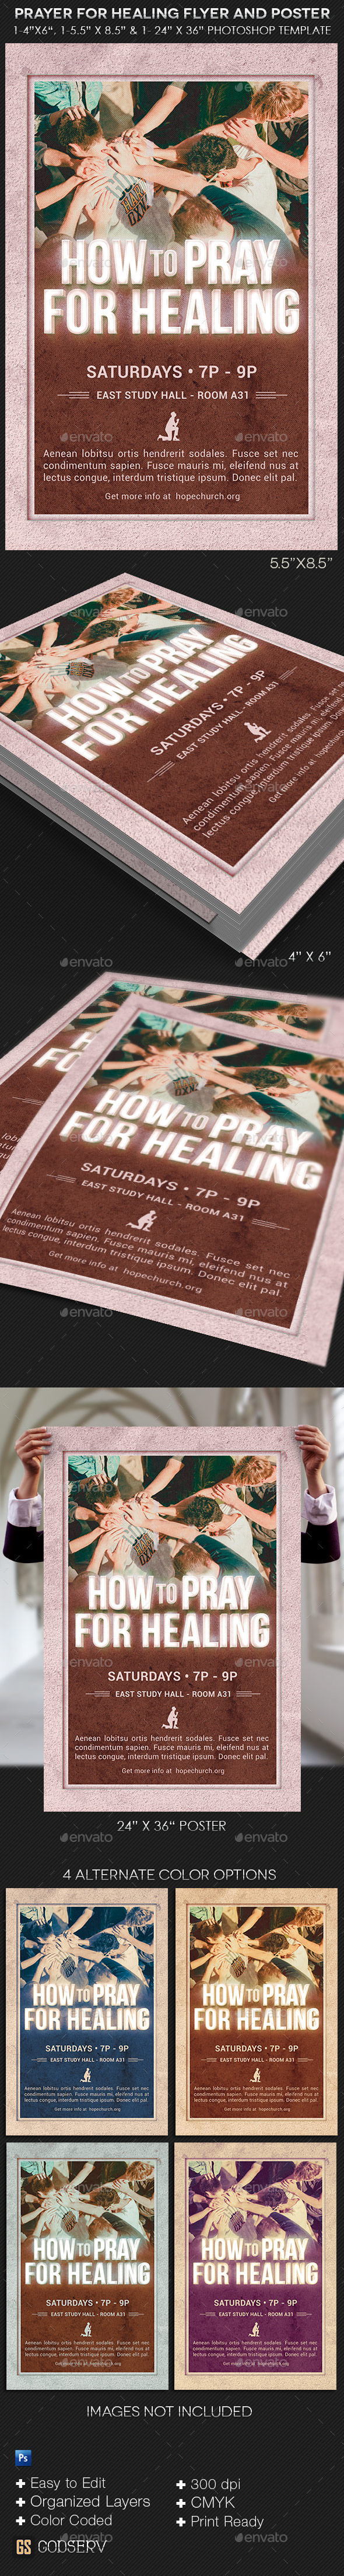 Pray for healing flyer and poster template preview